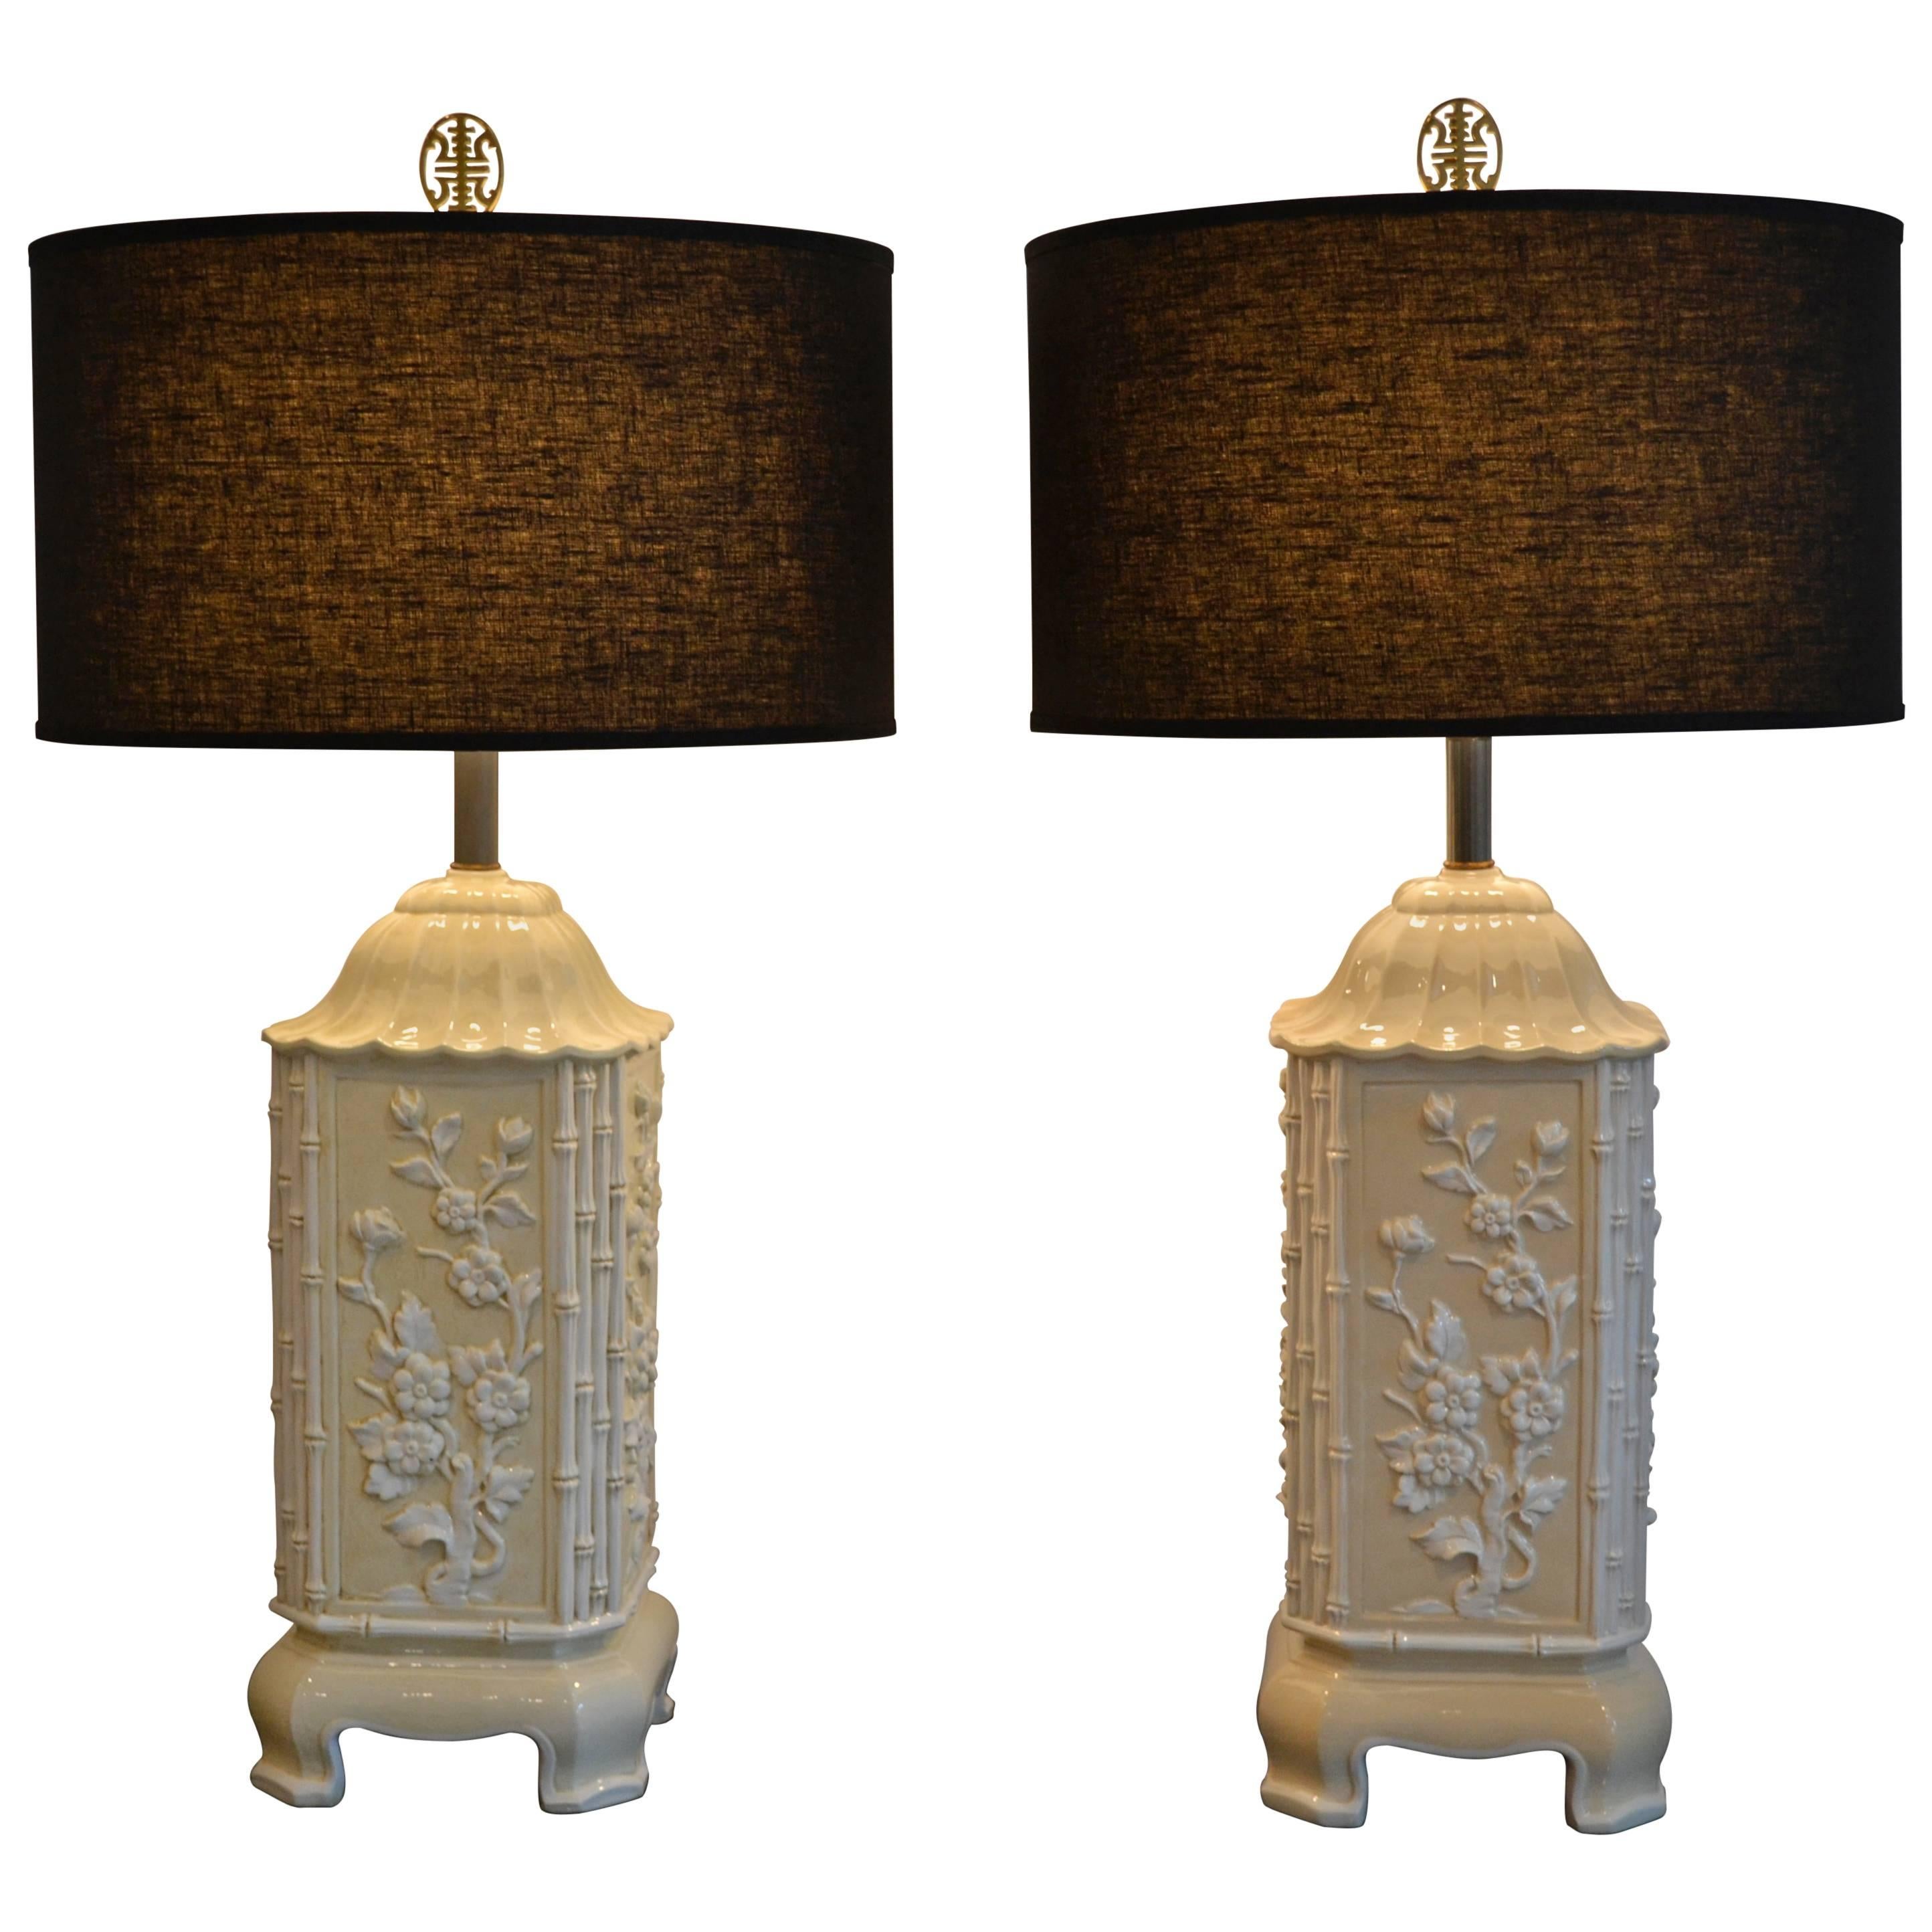 Pair of Ceramic Asian Bamboo and Floral Motif Cream and White Table Lamps, Italy